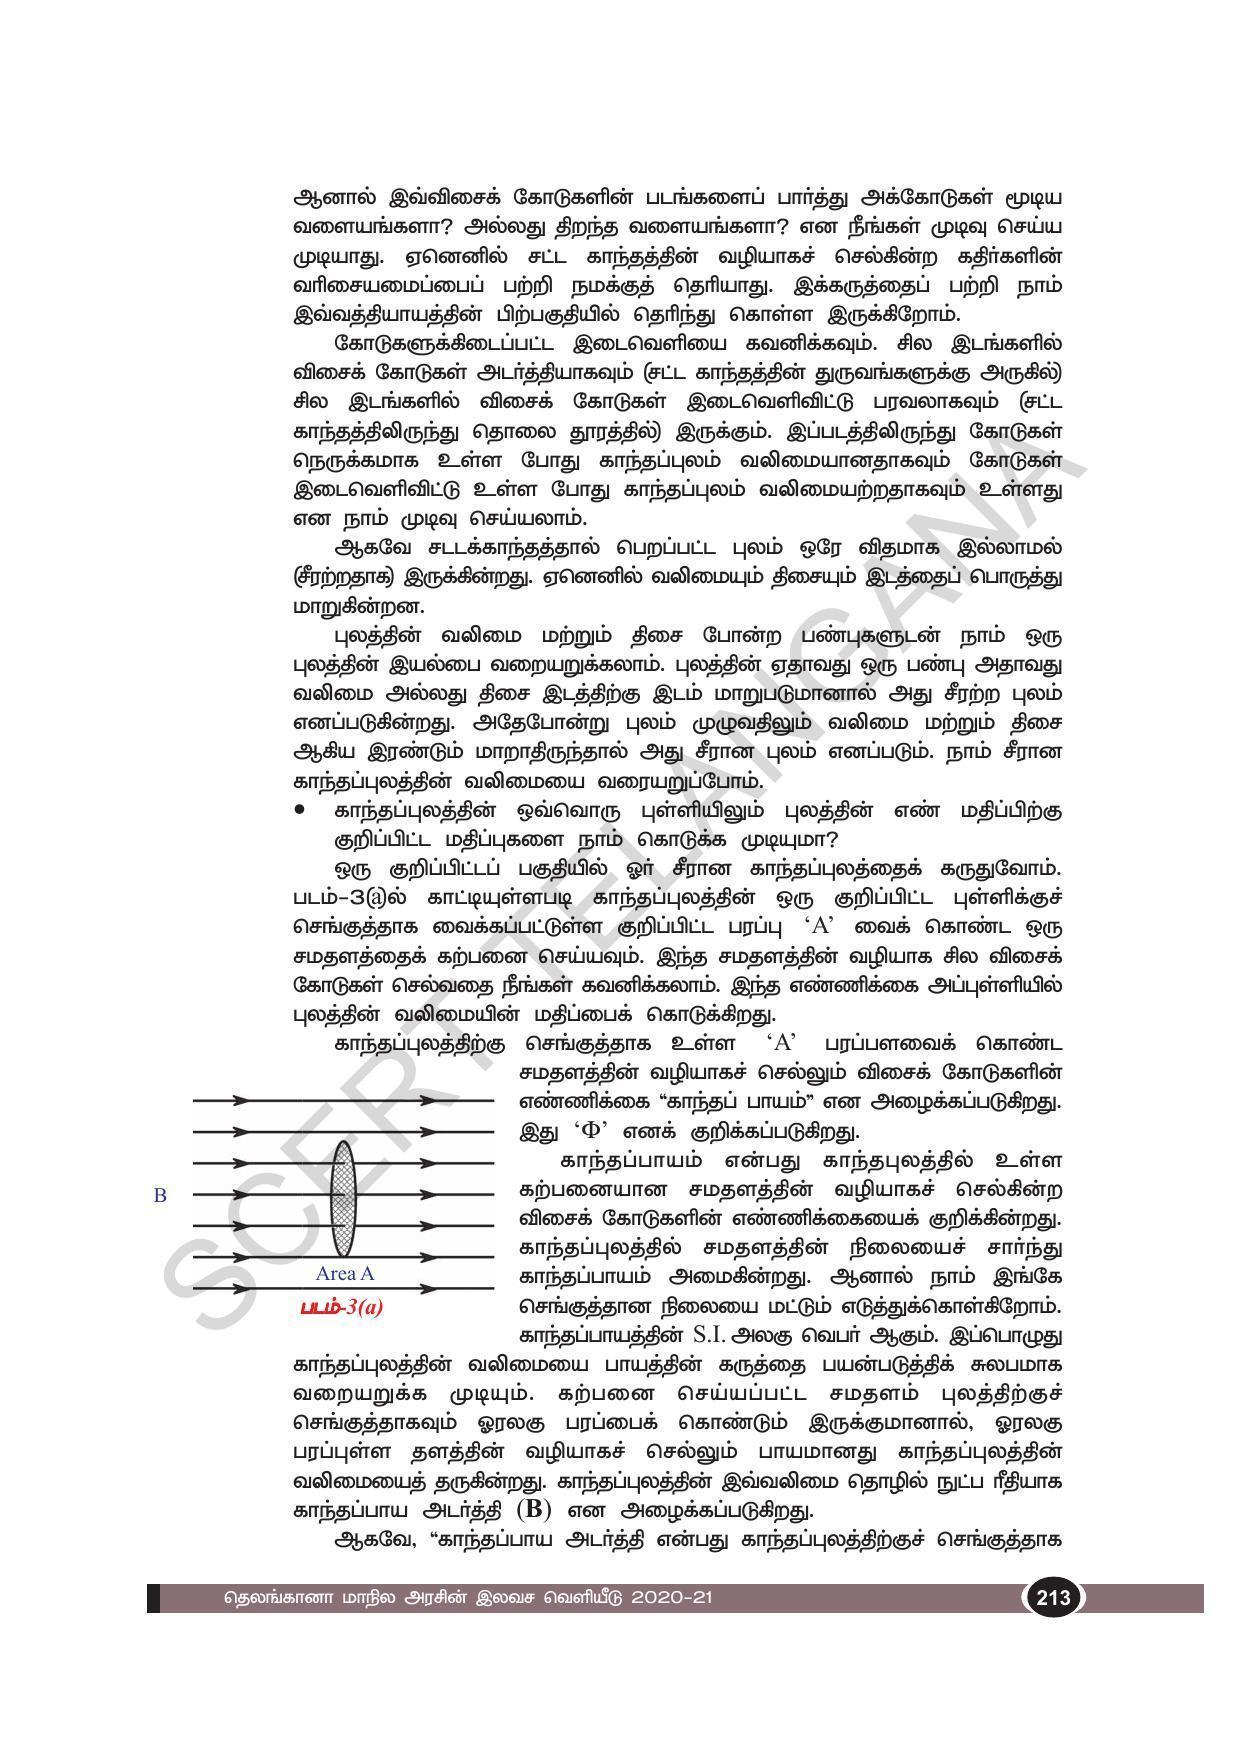 TS SCERT Class 10 Physical Science(Tamil Medium) Text Book - Page 225